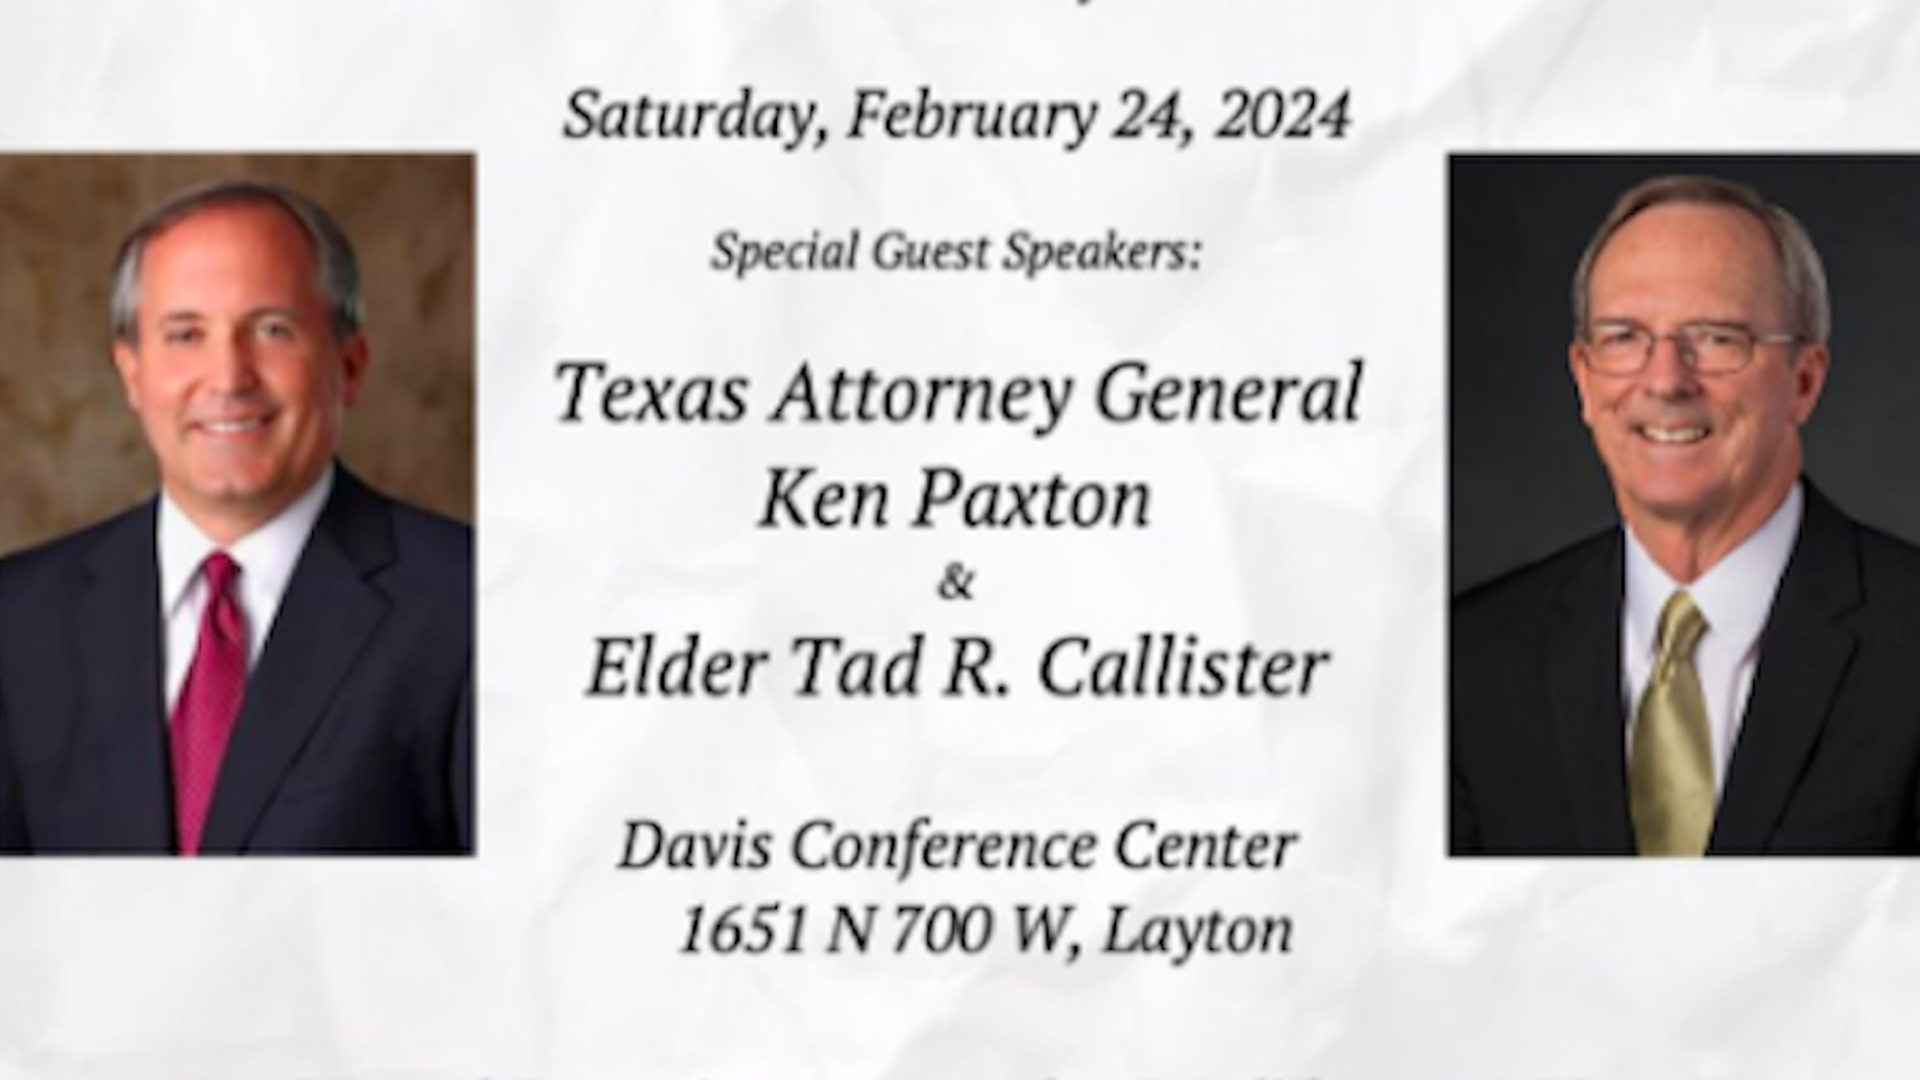 A flyer advertising Texas AG Ken Paxton and Latter-day Saint emeritus authority Elder Tad R. Callister as speakers at a Republican fundraiser